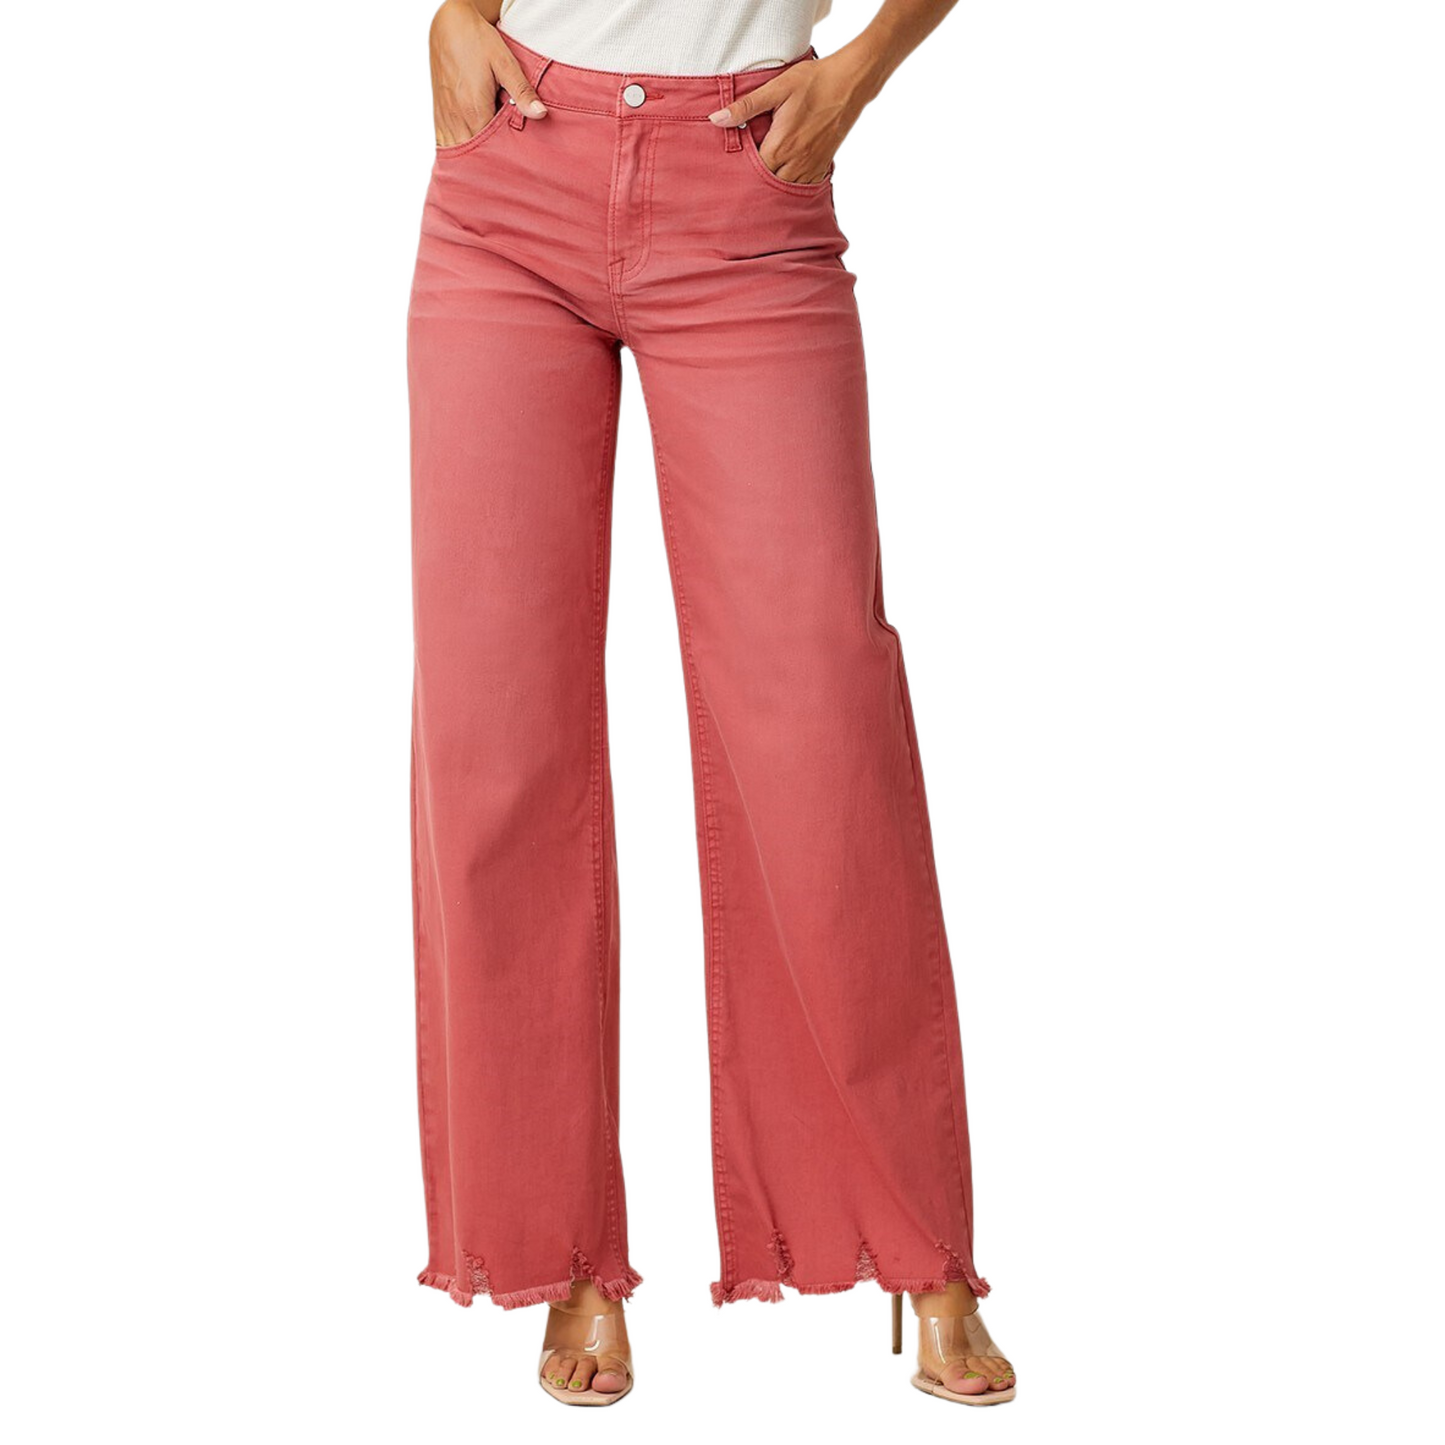 High-rise flare jeans from Risen Brand boast a brick color and raw hem for a modern twist. The flare gives them a stylish silhouette with timeless appeal. Crafted using quality fabric, these jeans are a perfect addition to any wardrobe.